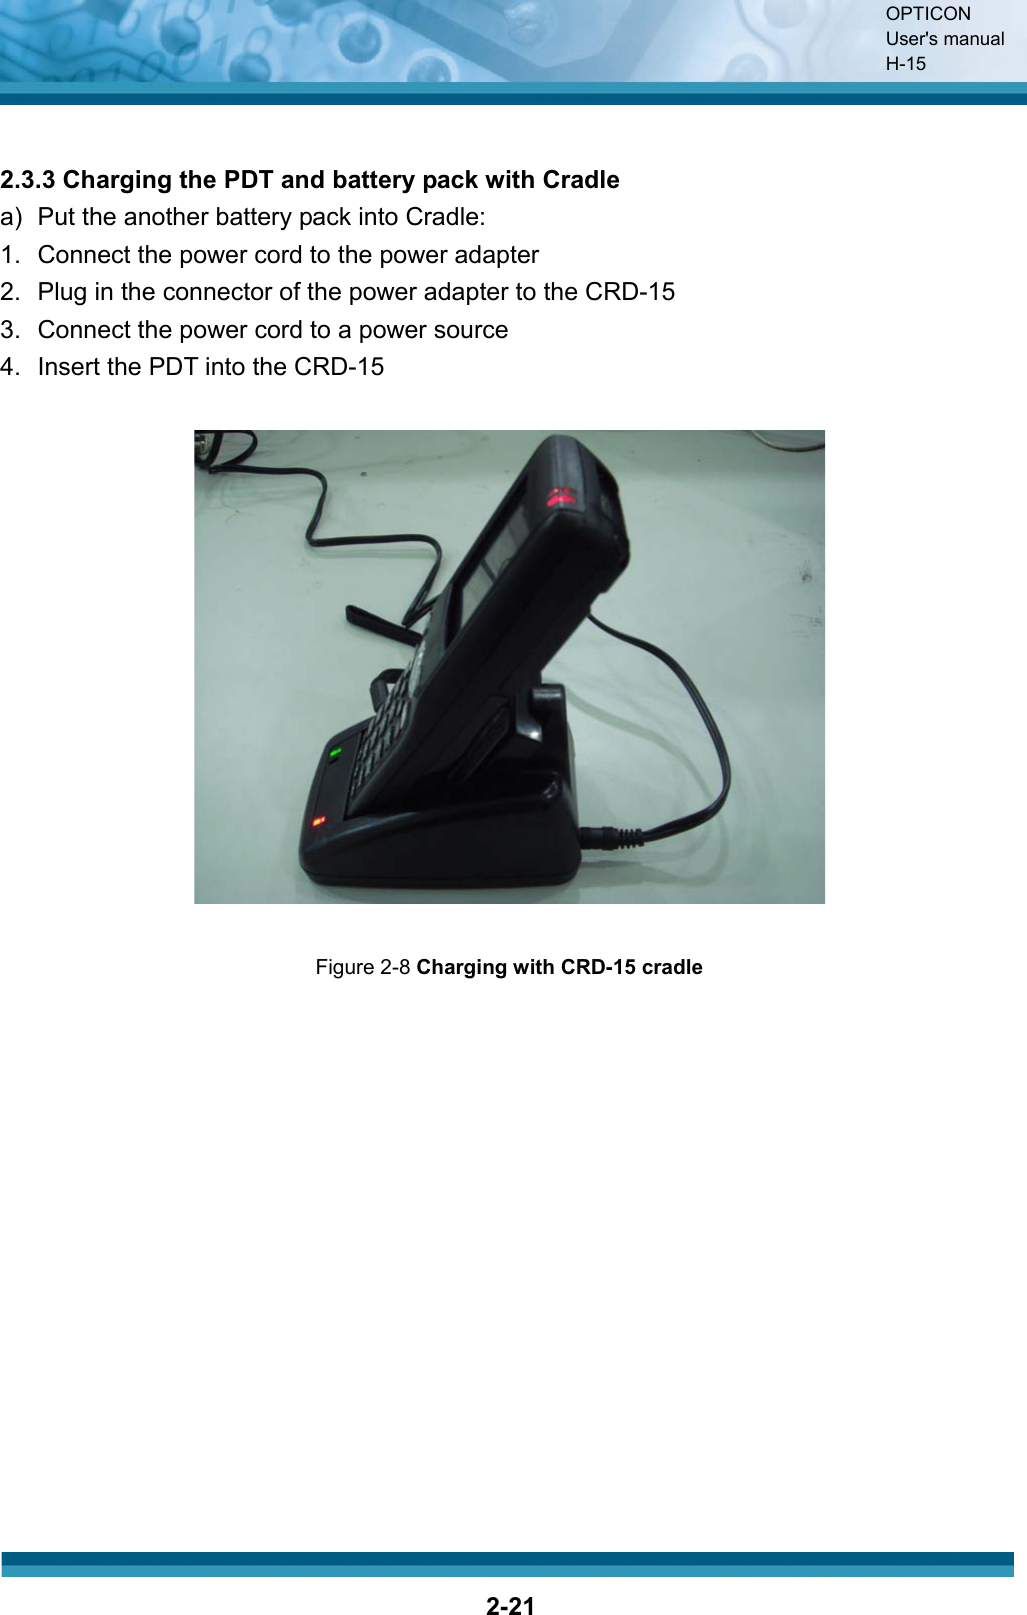 OPTICON User&apos;s manual H-152-212.3.3 Charging the PDT and battery pack with Cradle a)   Put the another battery pack into Cradle: 1.  Connect the power cord to the power adapter 2.  Plug in the connector of the power adapter to the CRD-15 3.  Connect the power cord to a power source 4.  Insert the PDT into the CRD-15 Figure 2-8 Charging with CRD-15 cradle